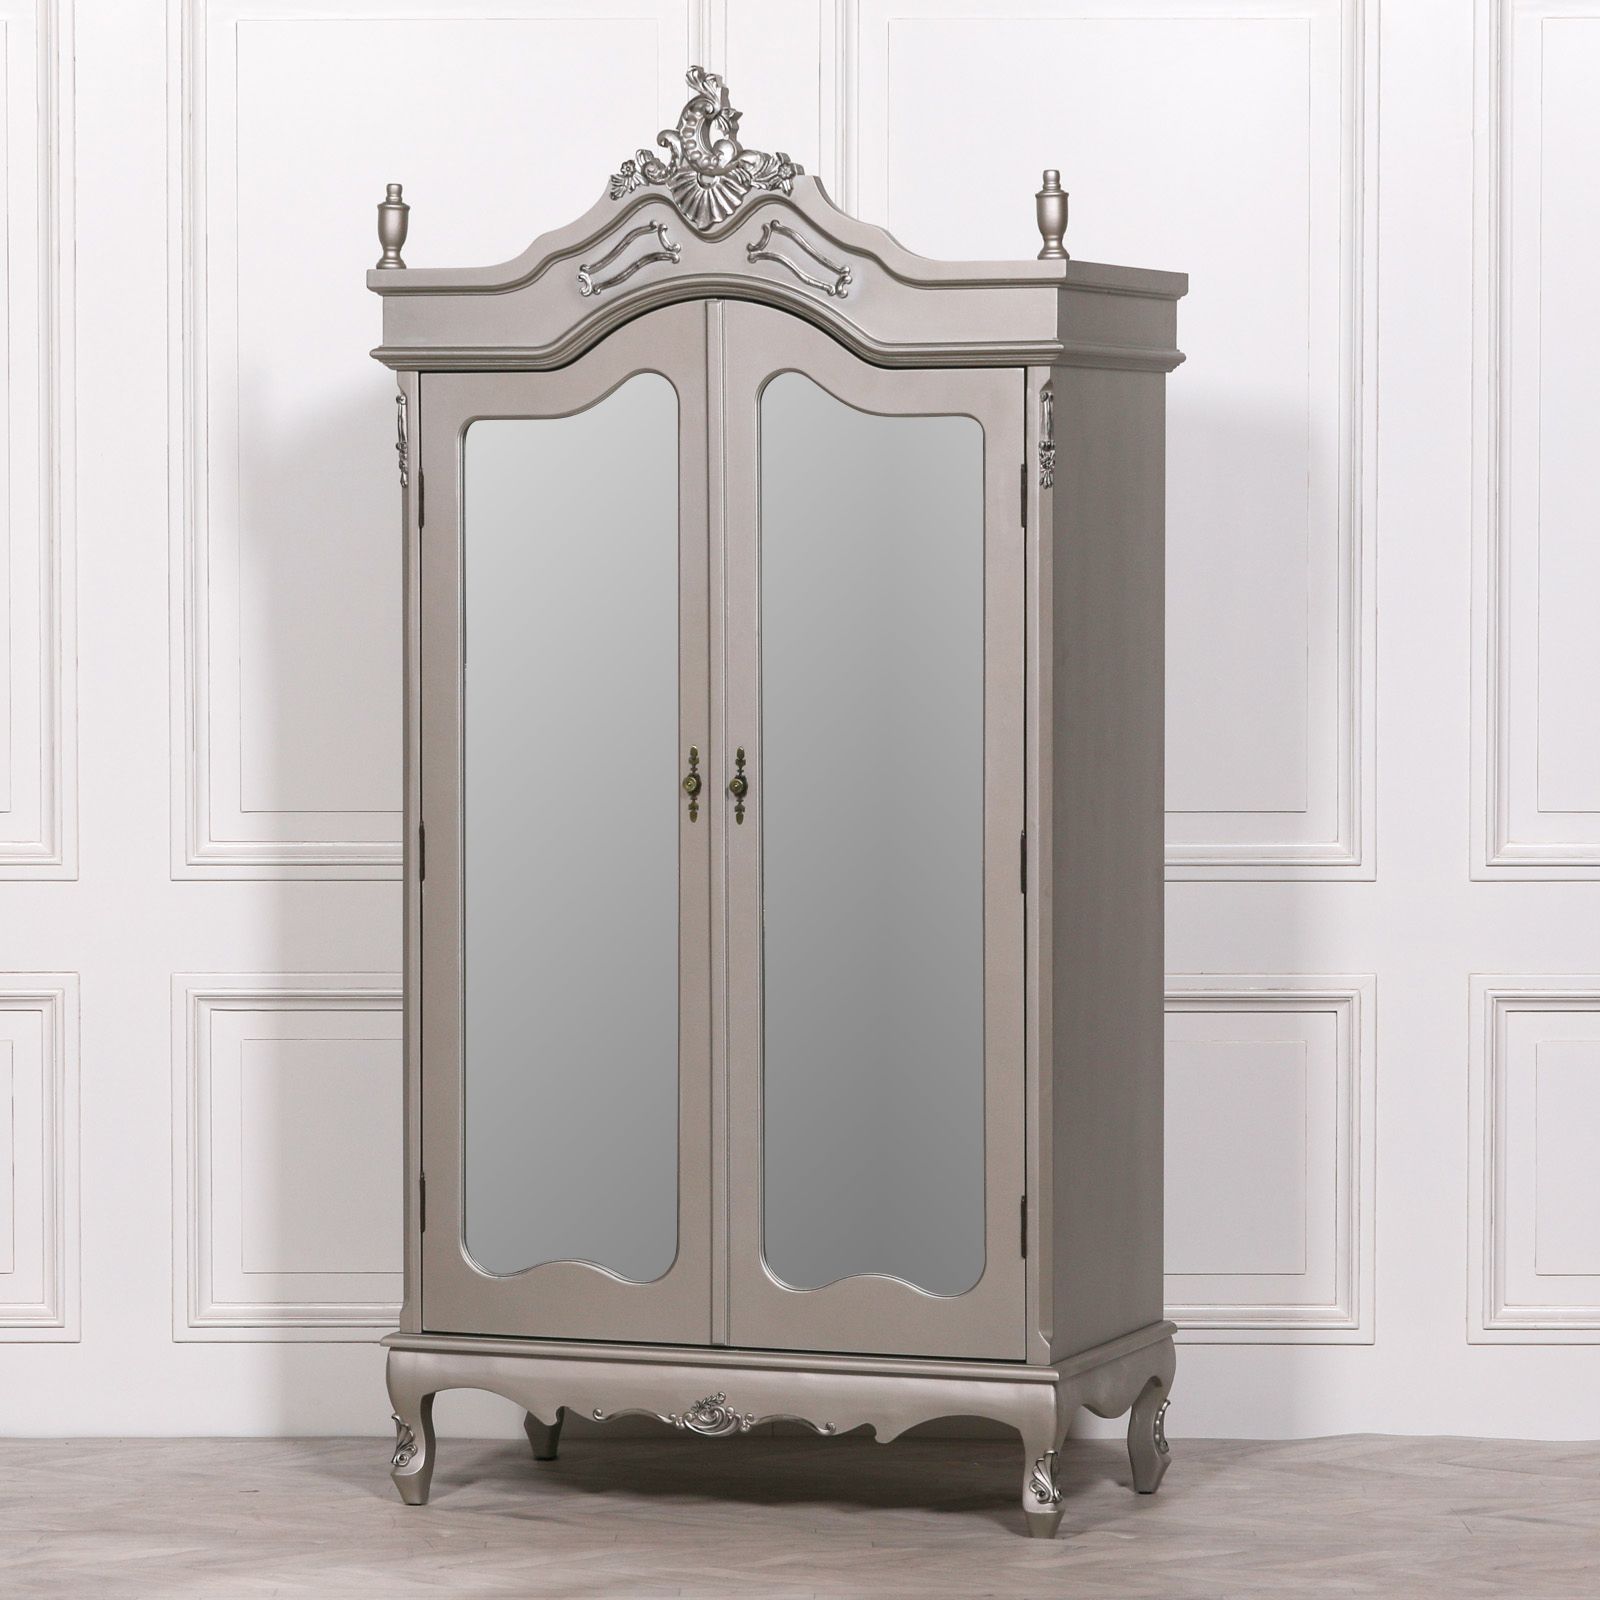 French Style Double Armoire Silver Wardrobe Mirrored Doors Regarding Silver French Wardrobes (Gallery 5 of 20)